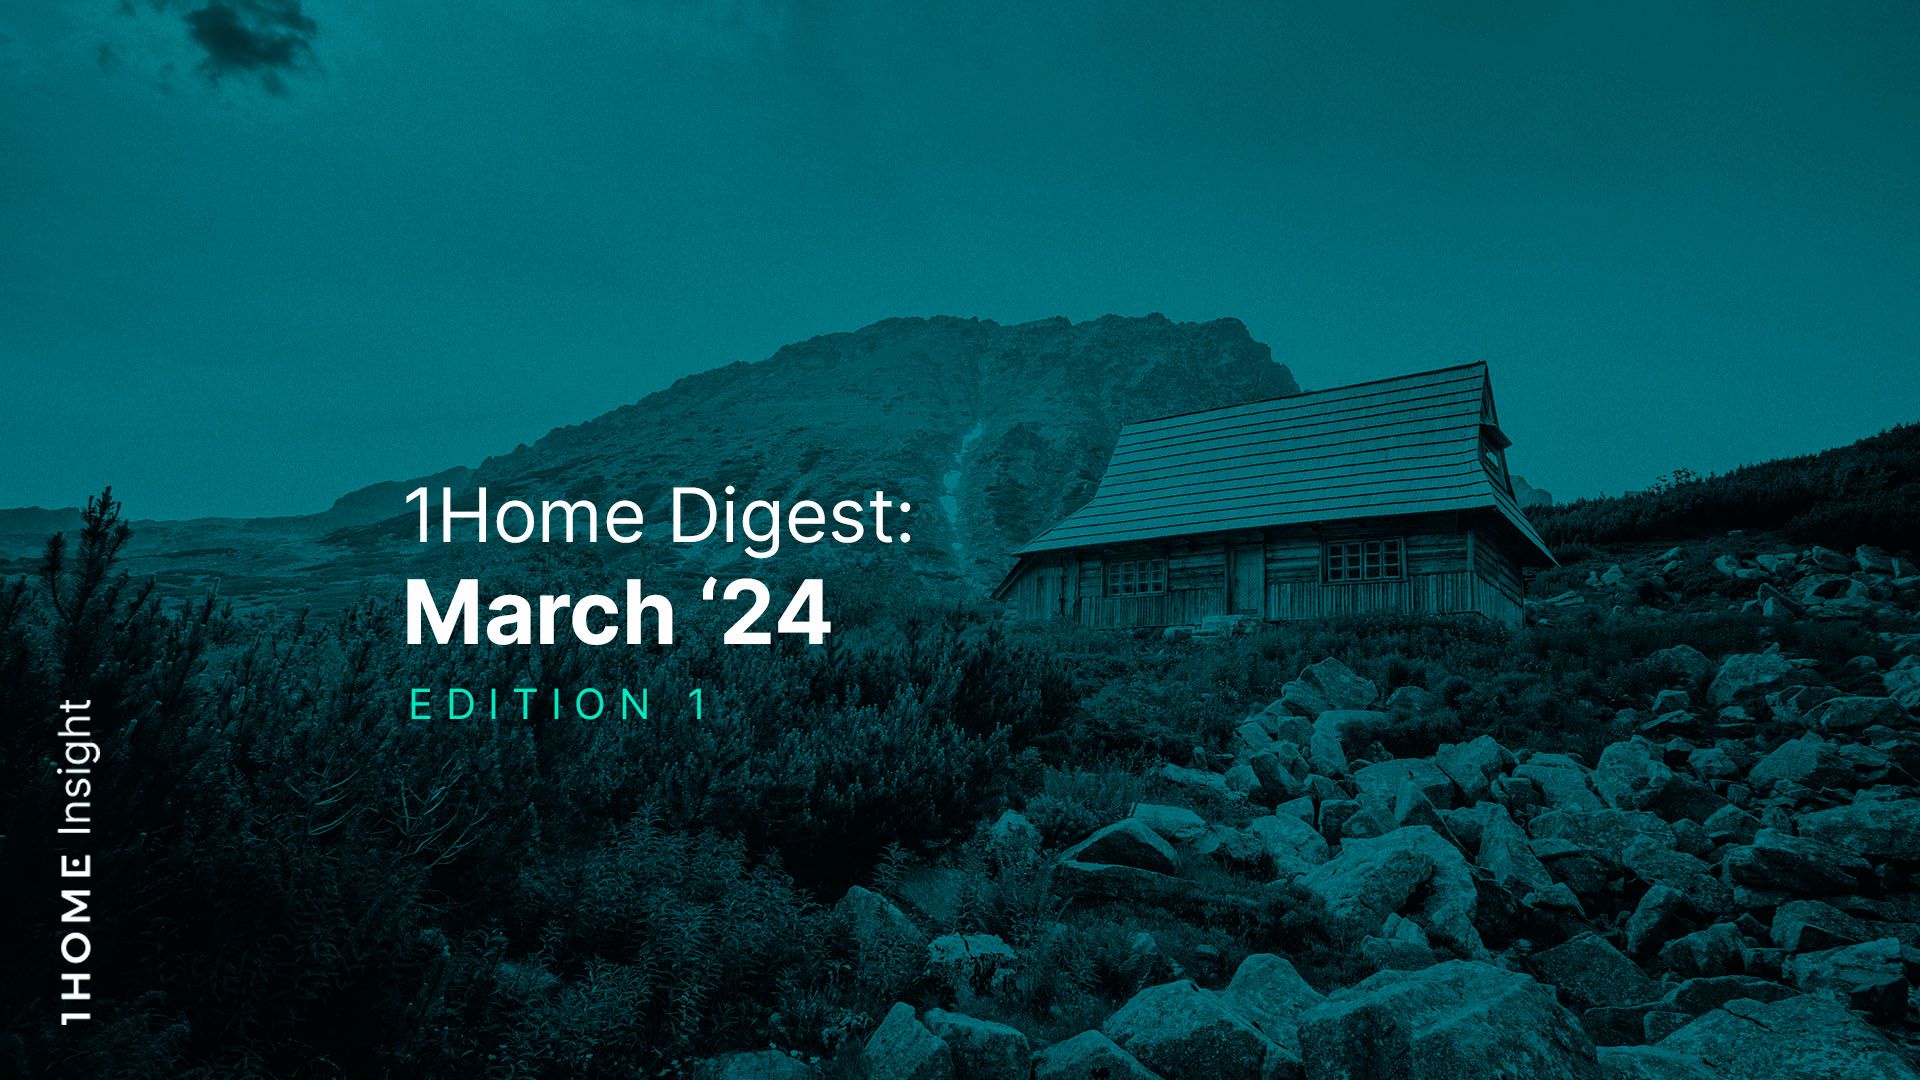 1Home Digest: March '24 Edition 1